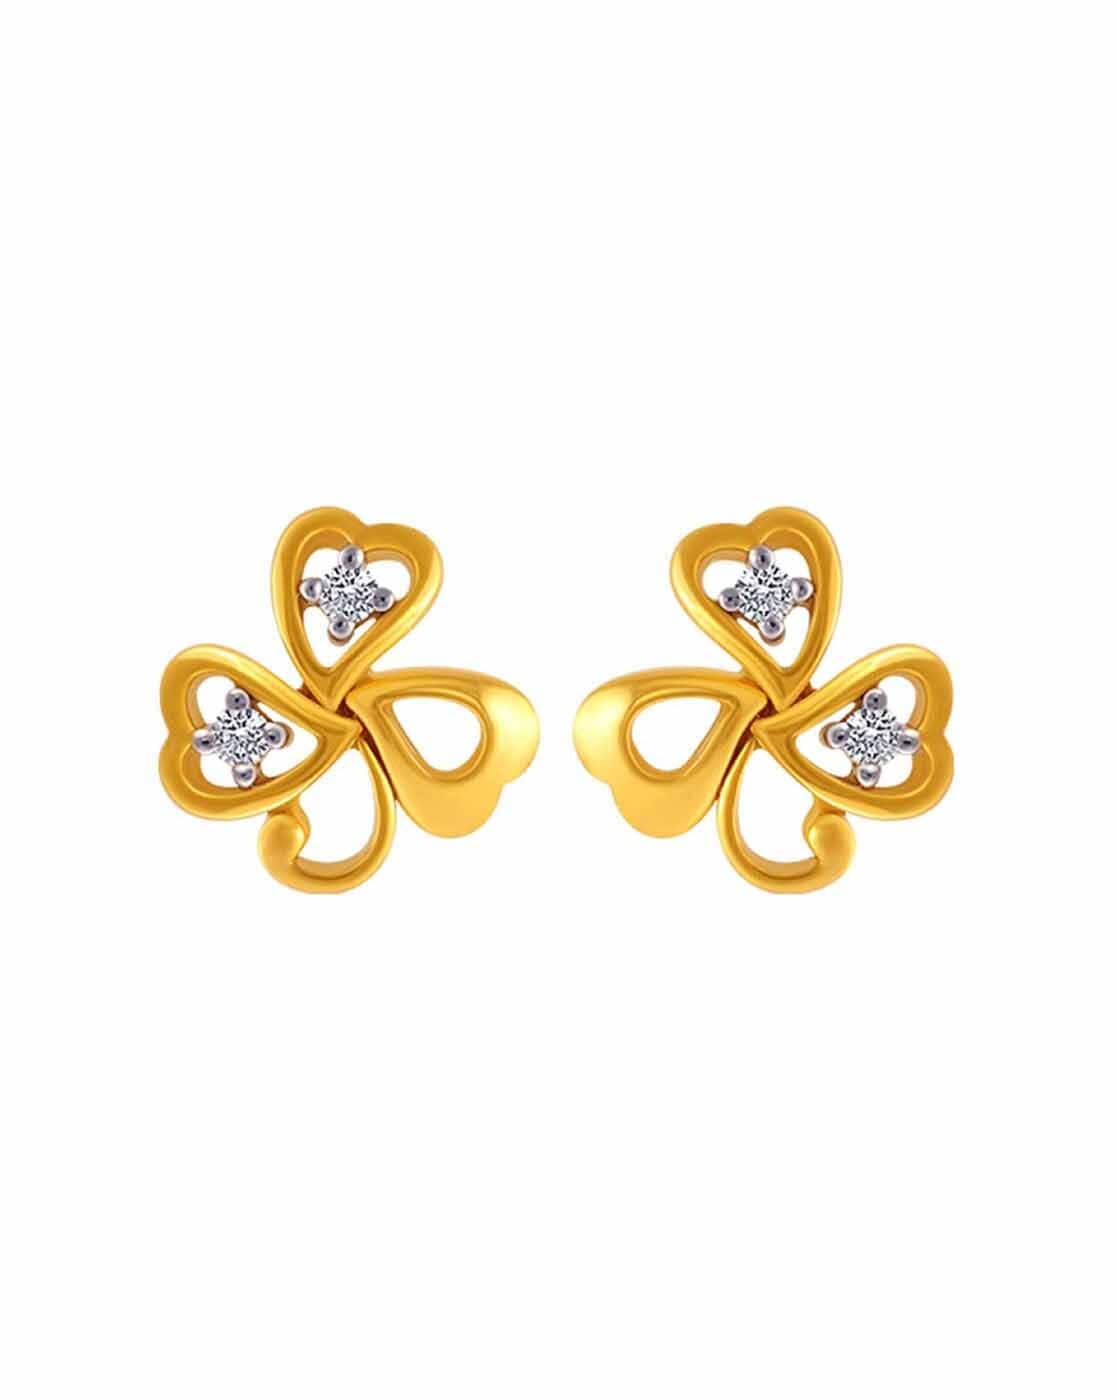 2020 Latest Gold Stud Earrings Design For Ladies|#Light Weight Gold #Stud  Earrings|Gold Tops D… | Gold earrings models, Gold earrings for women, Gold  earrings studs